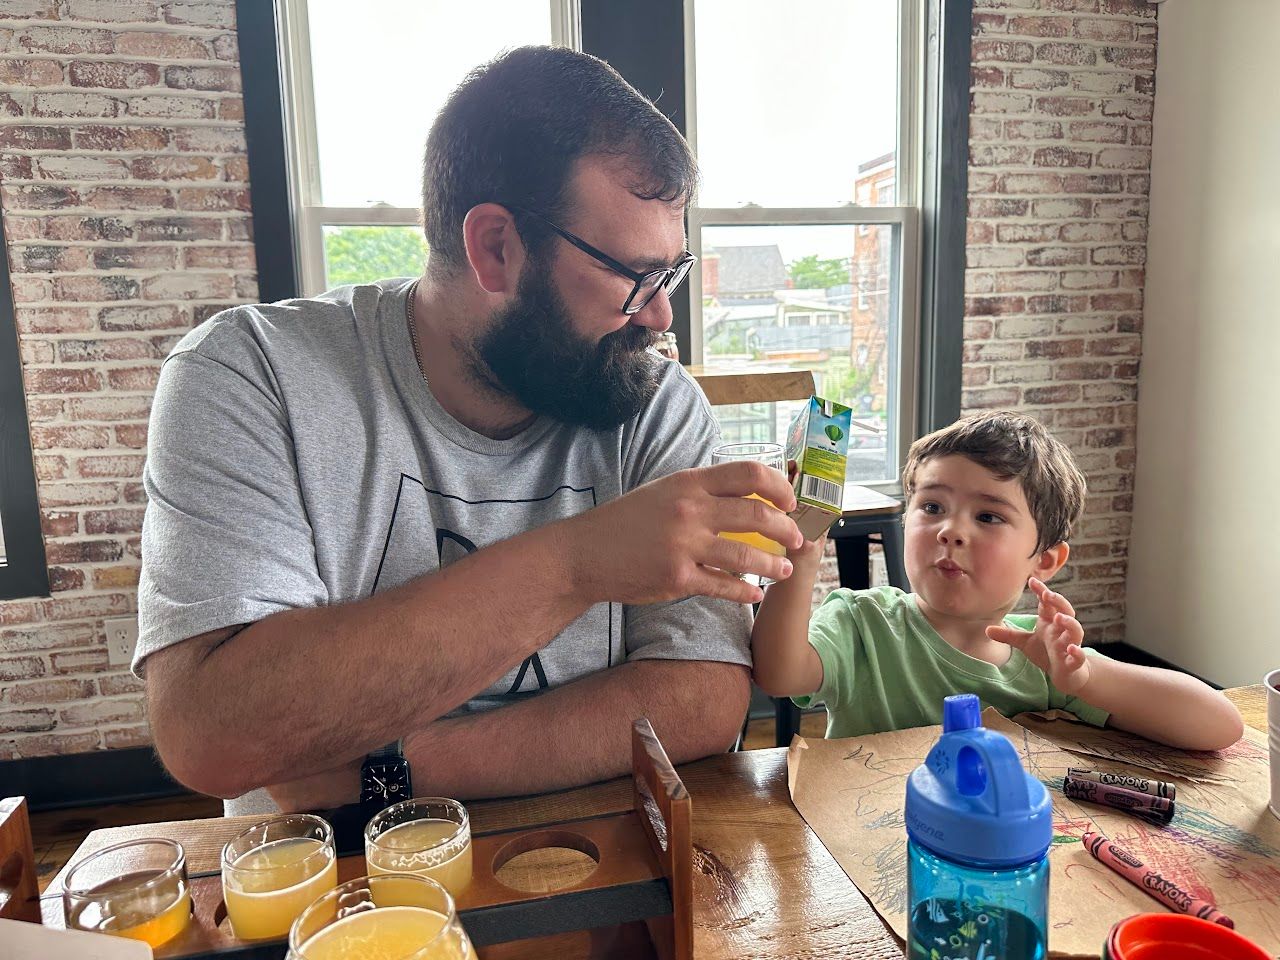 My son and I clinking our drinks at a local pizza brewery